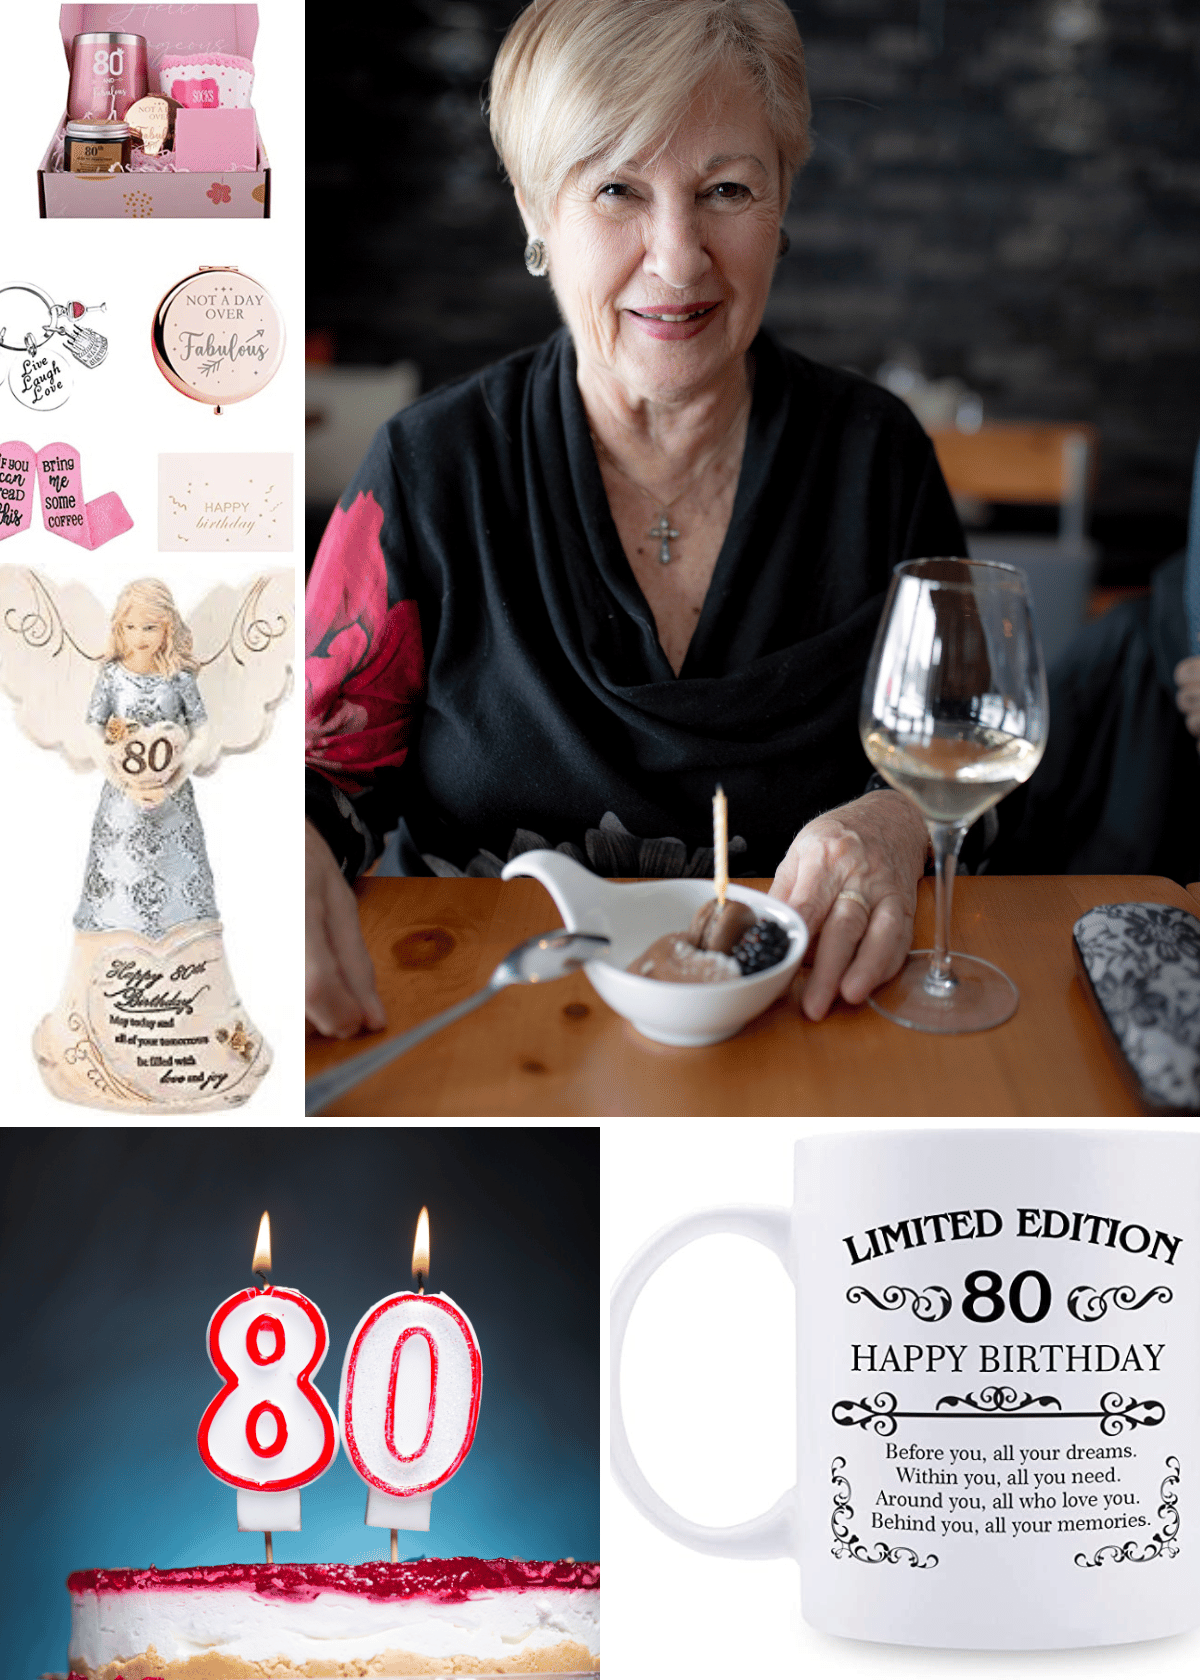 80th Birthday Gift Ideas for Mom: Top Picks on Amazon